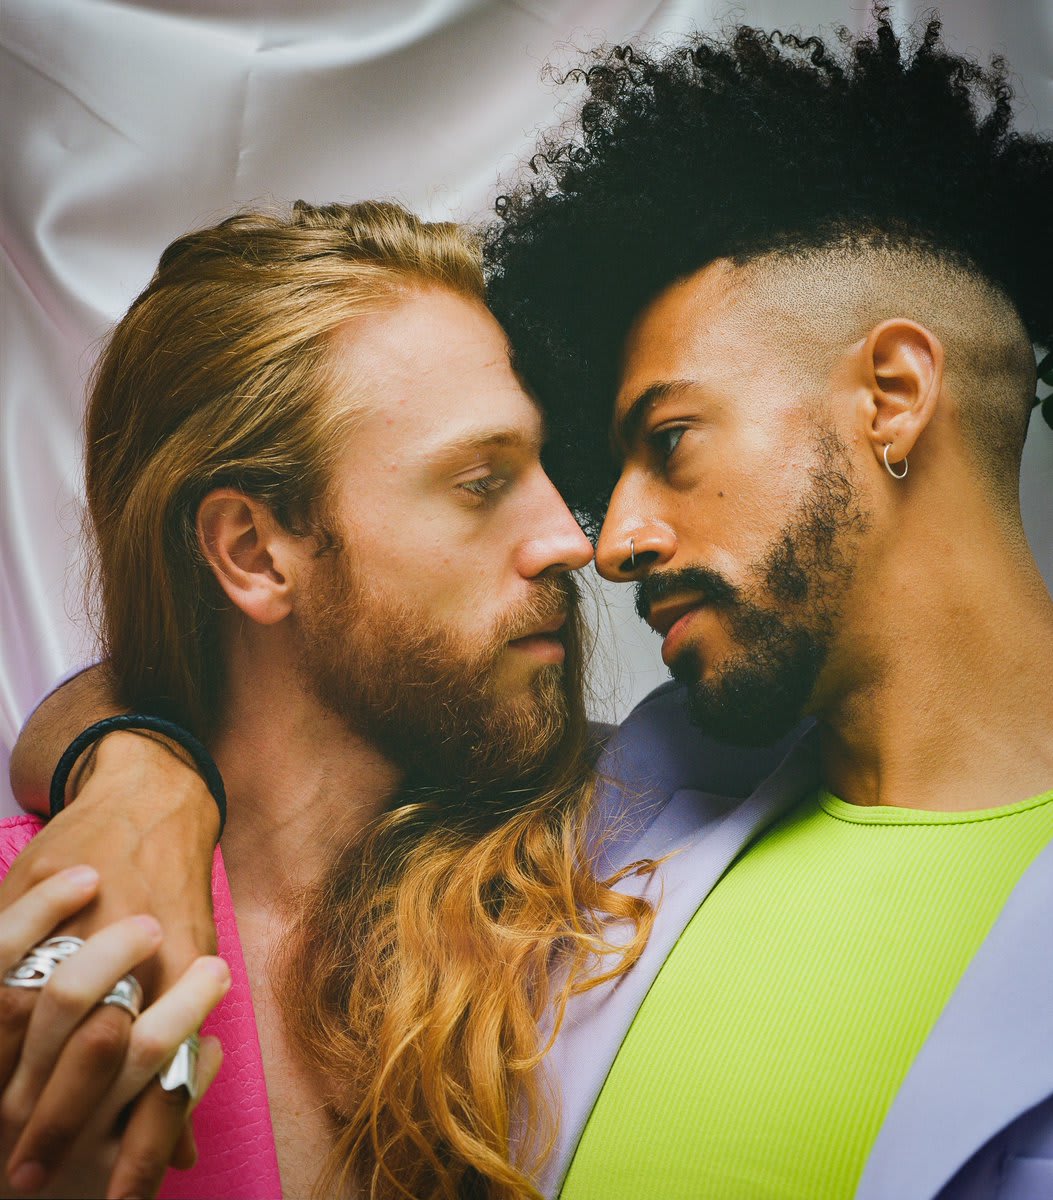 "Any backlash is necessary for progression. There are still ignorant people who need to be educated." As 35,000 homophobes sign a petition to have the Cadbury's Creme Egg gay kiss advert removed, meet the real-life couple behind the sticky storm: